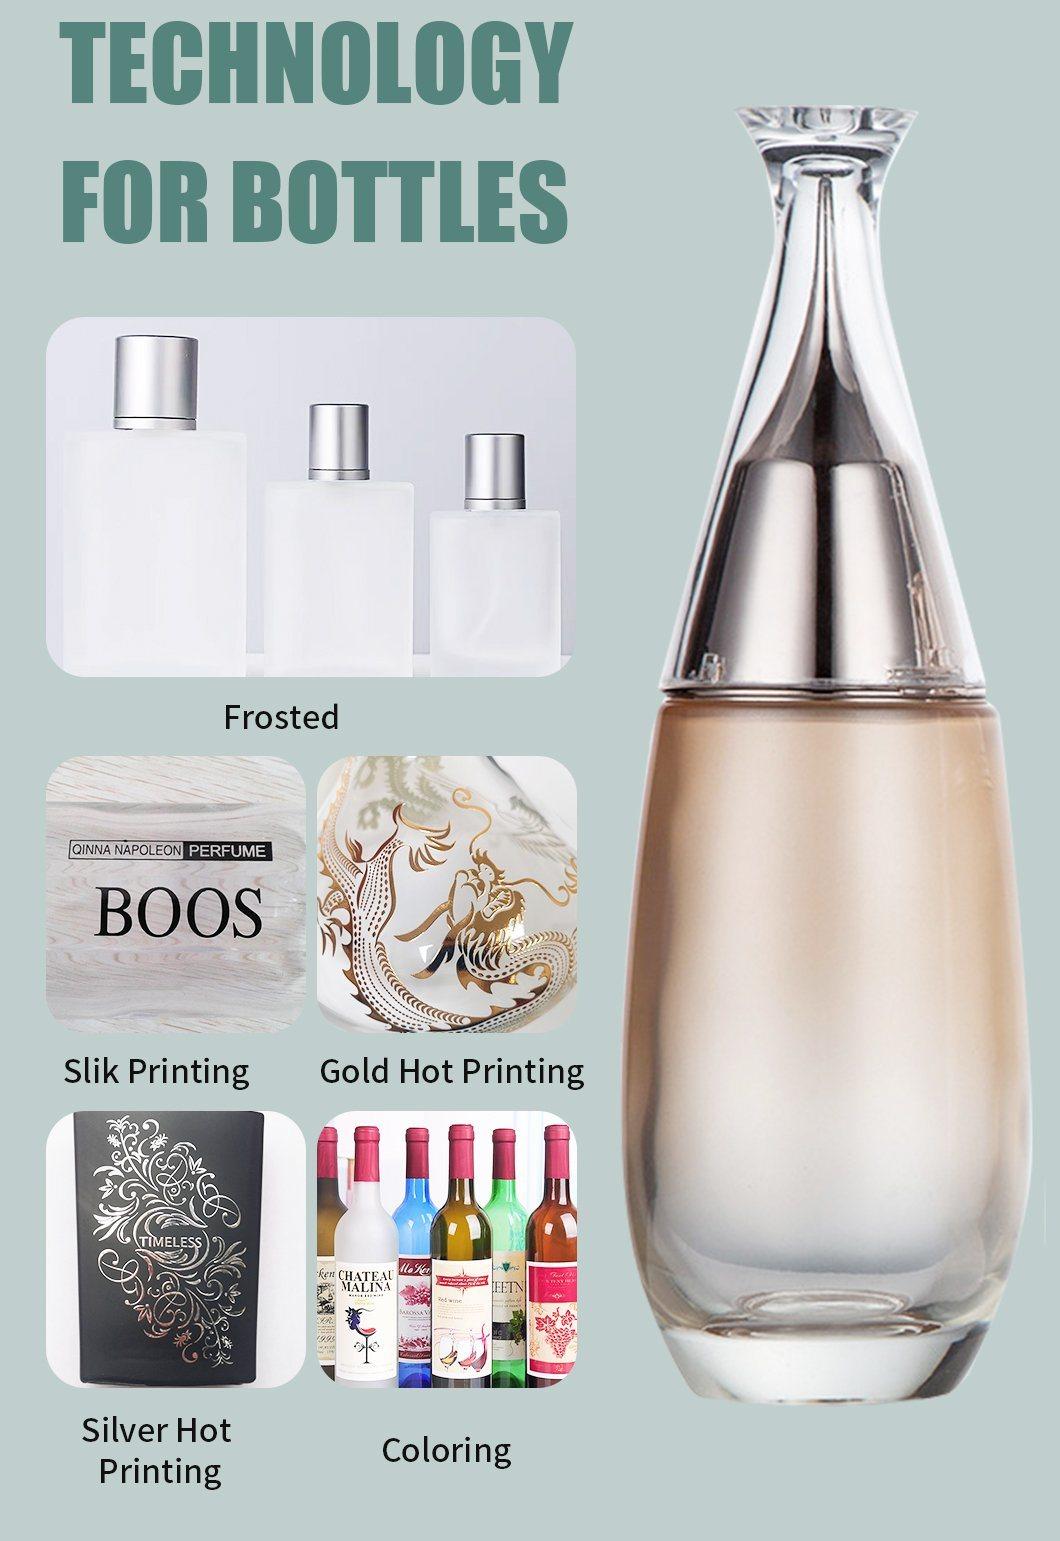 Round Cylinder Clear Glass Cosmetics Bottles with Thick Bottom High Quality